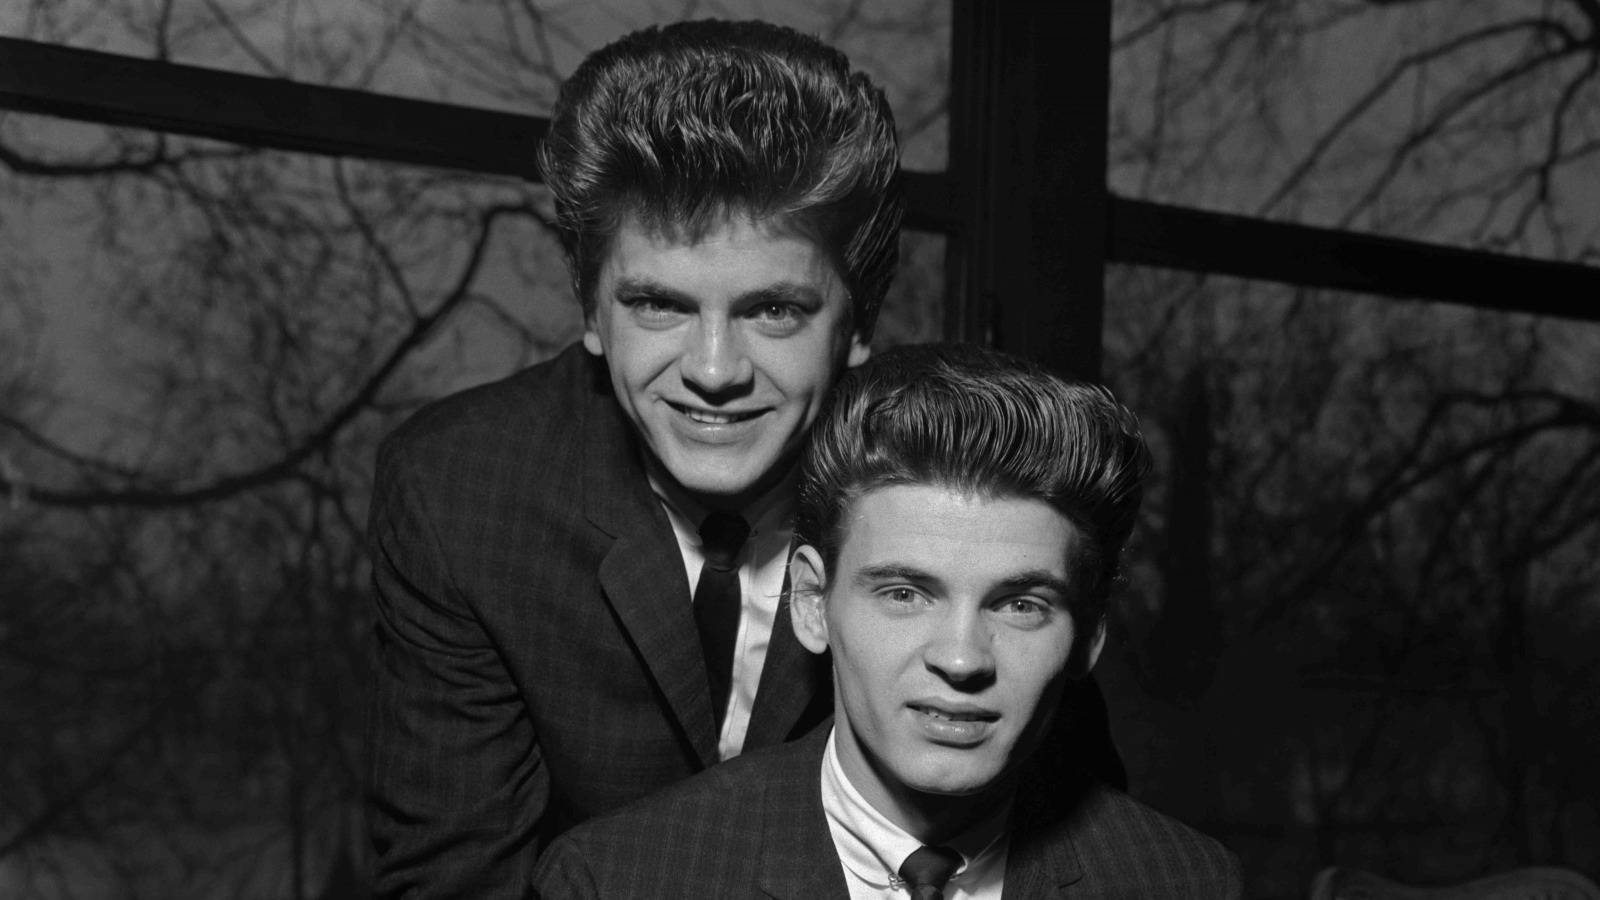 Rock Duo Everly Brothers Monochrome Photo Session Wallpaper